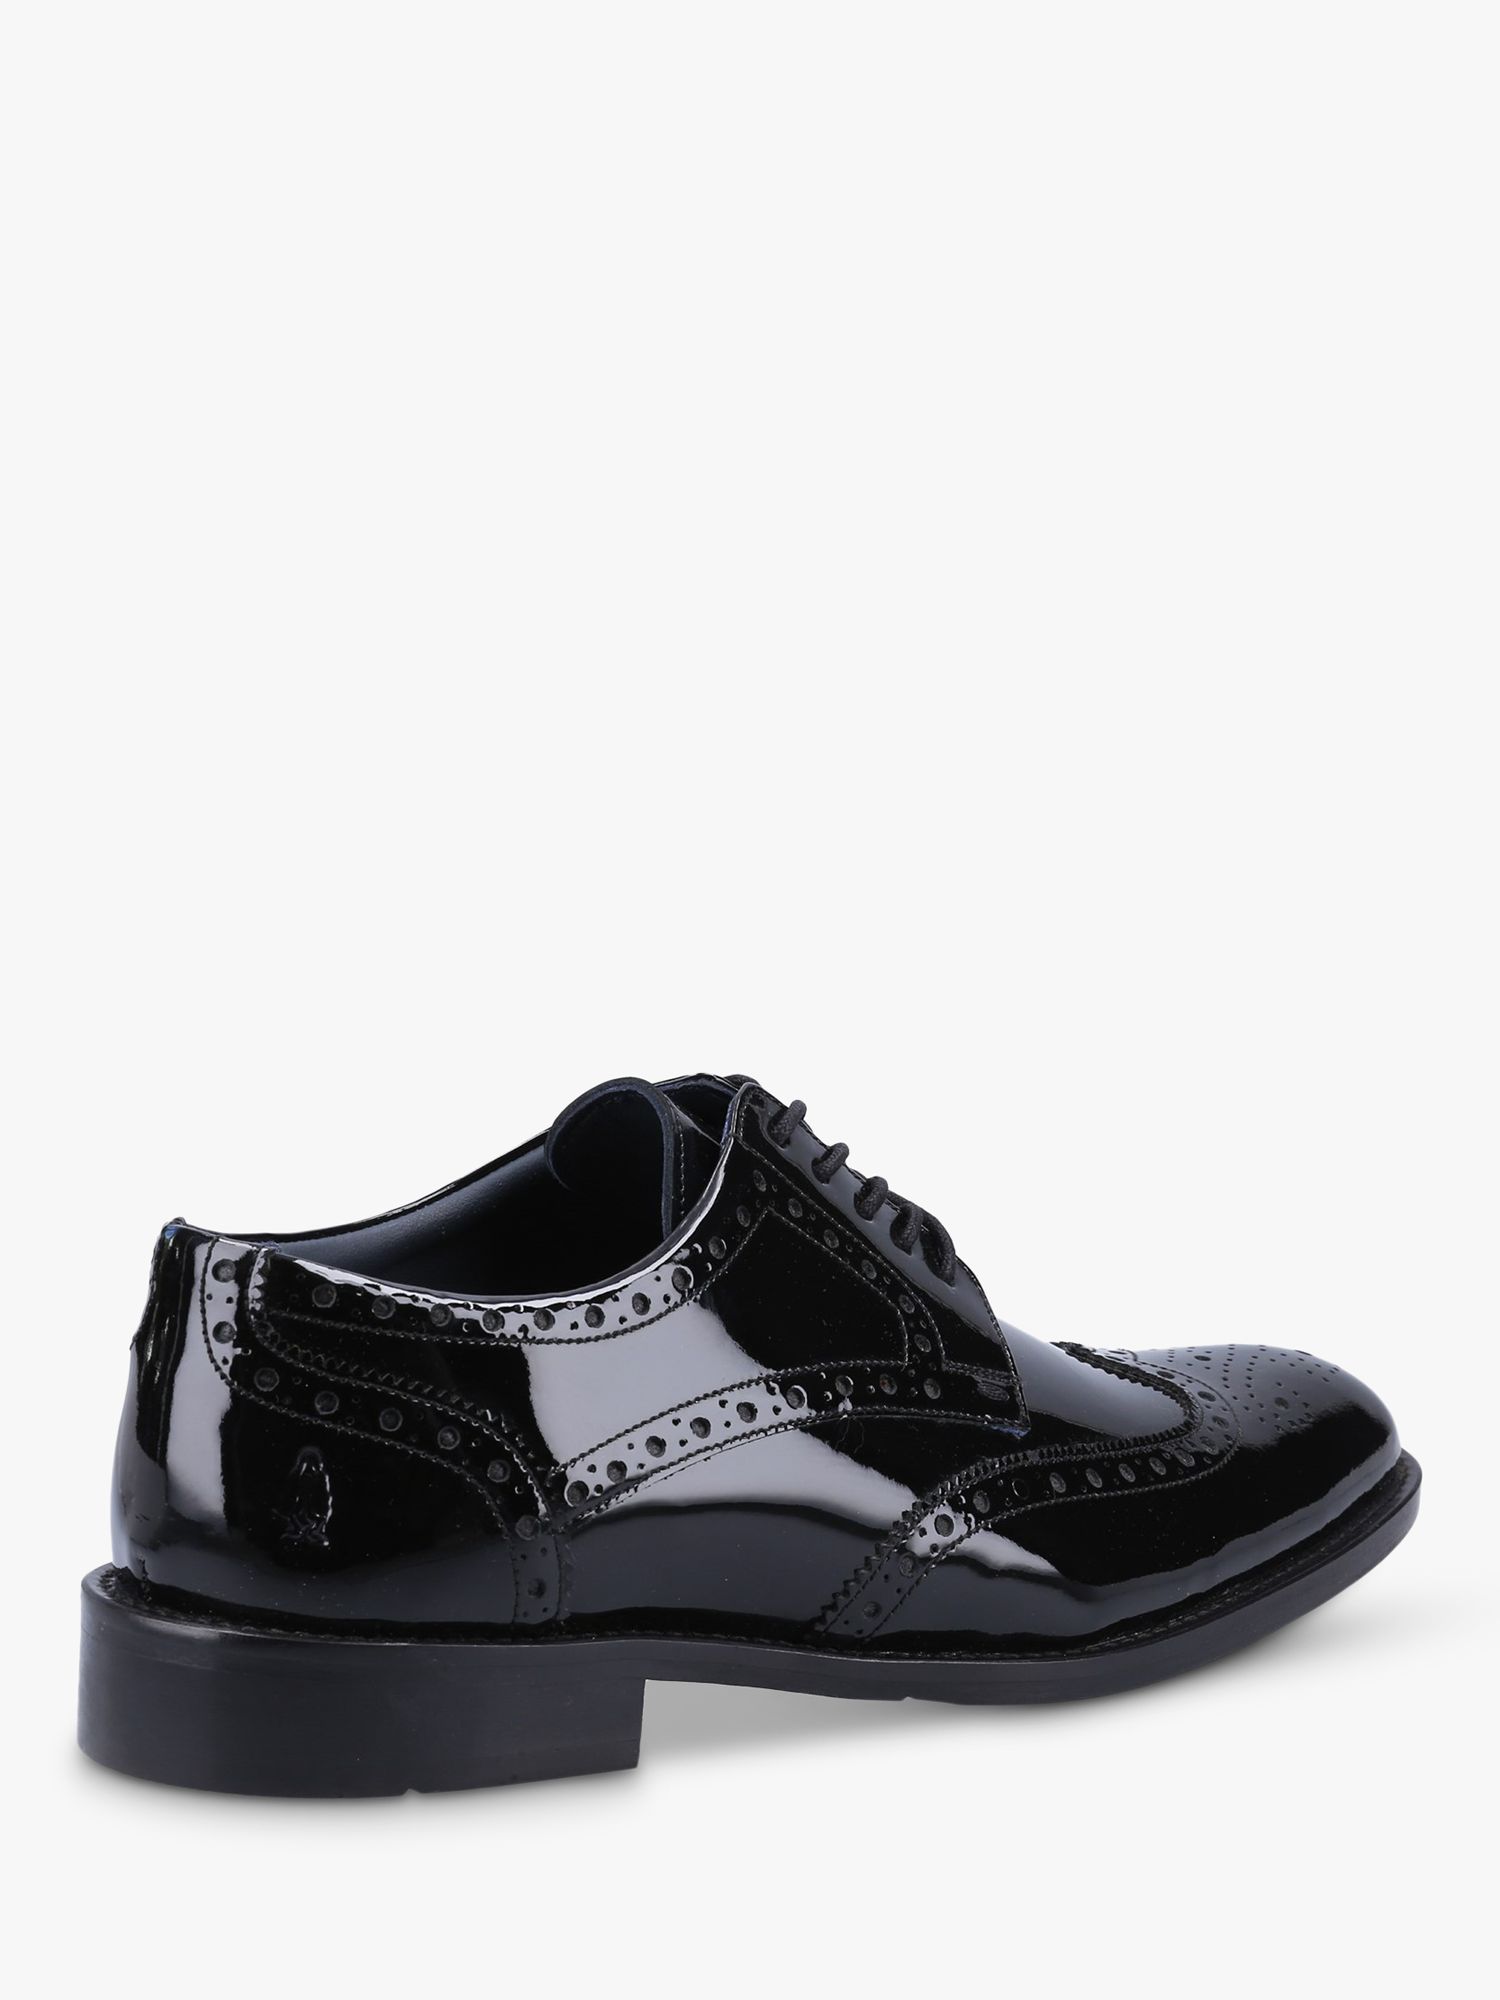 Hush Puppies Dustin Patent Leather Brogues, Black, 6